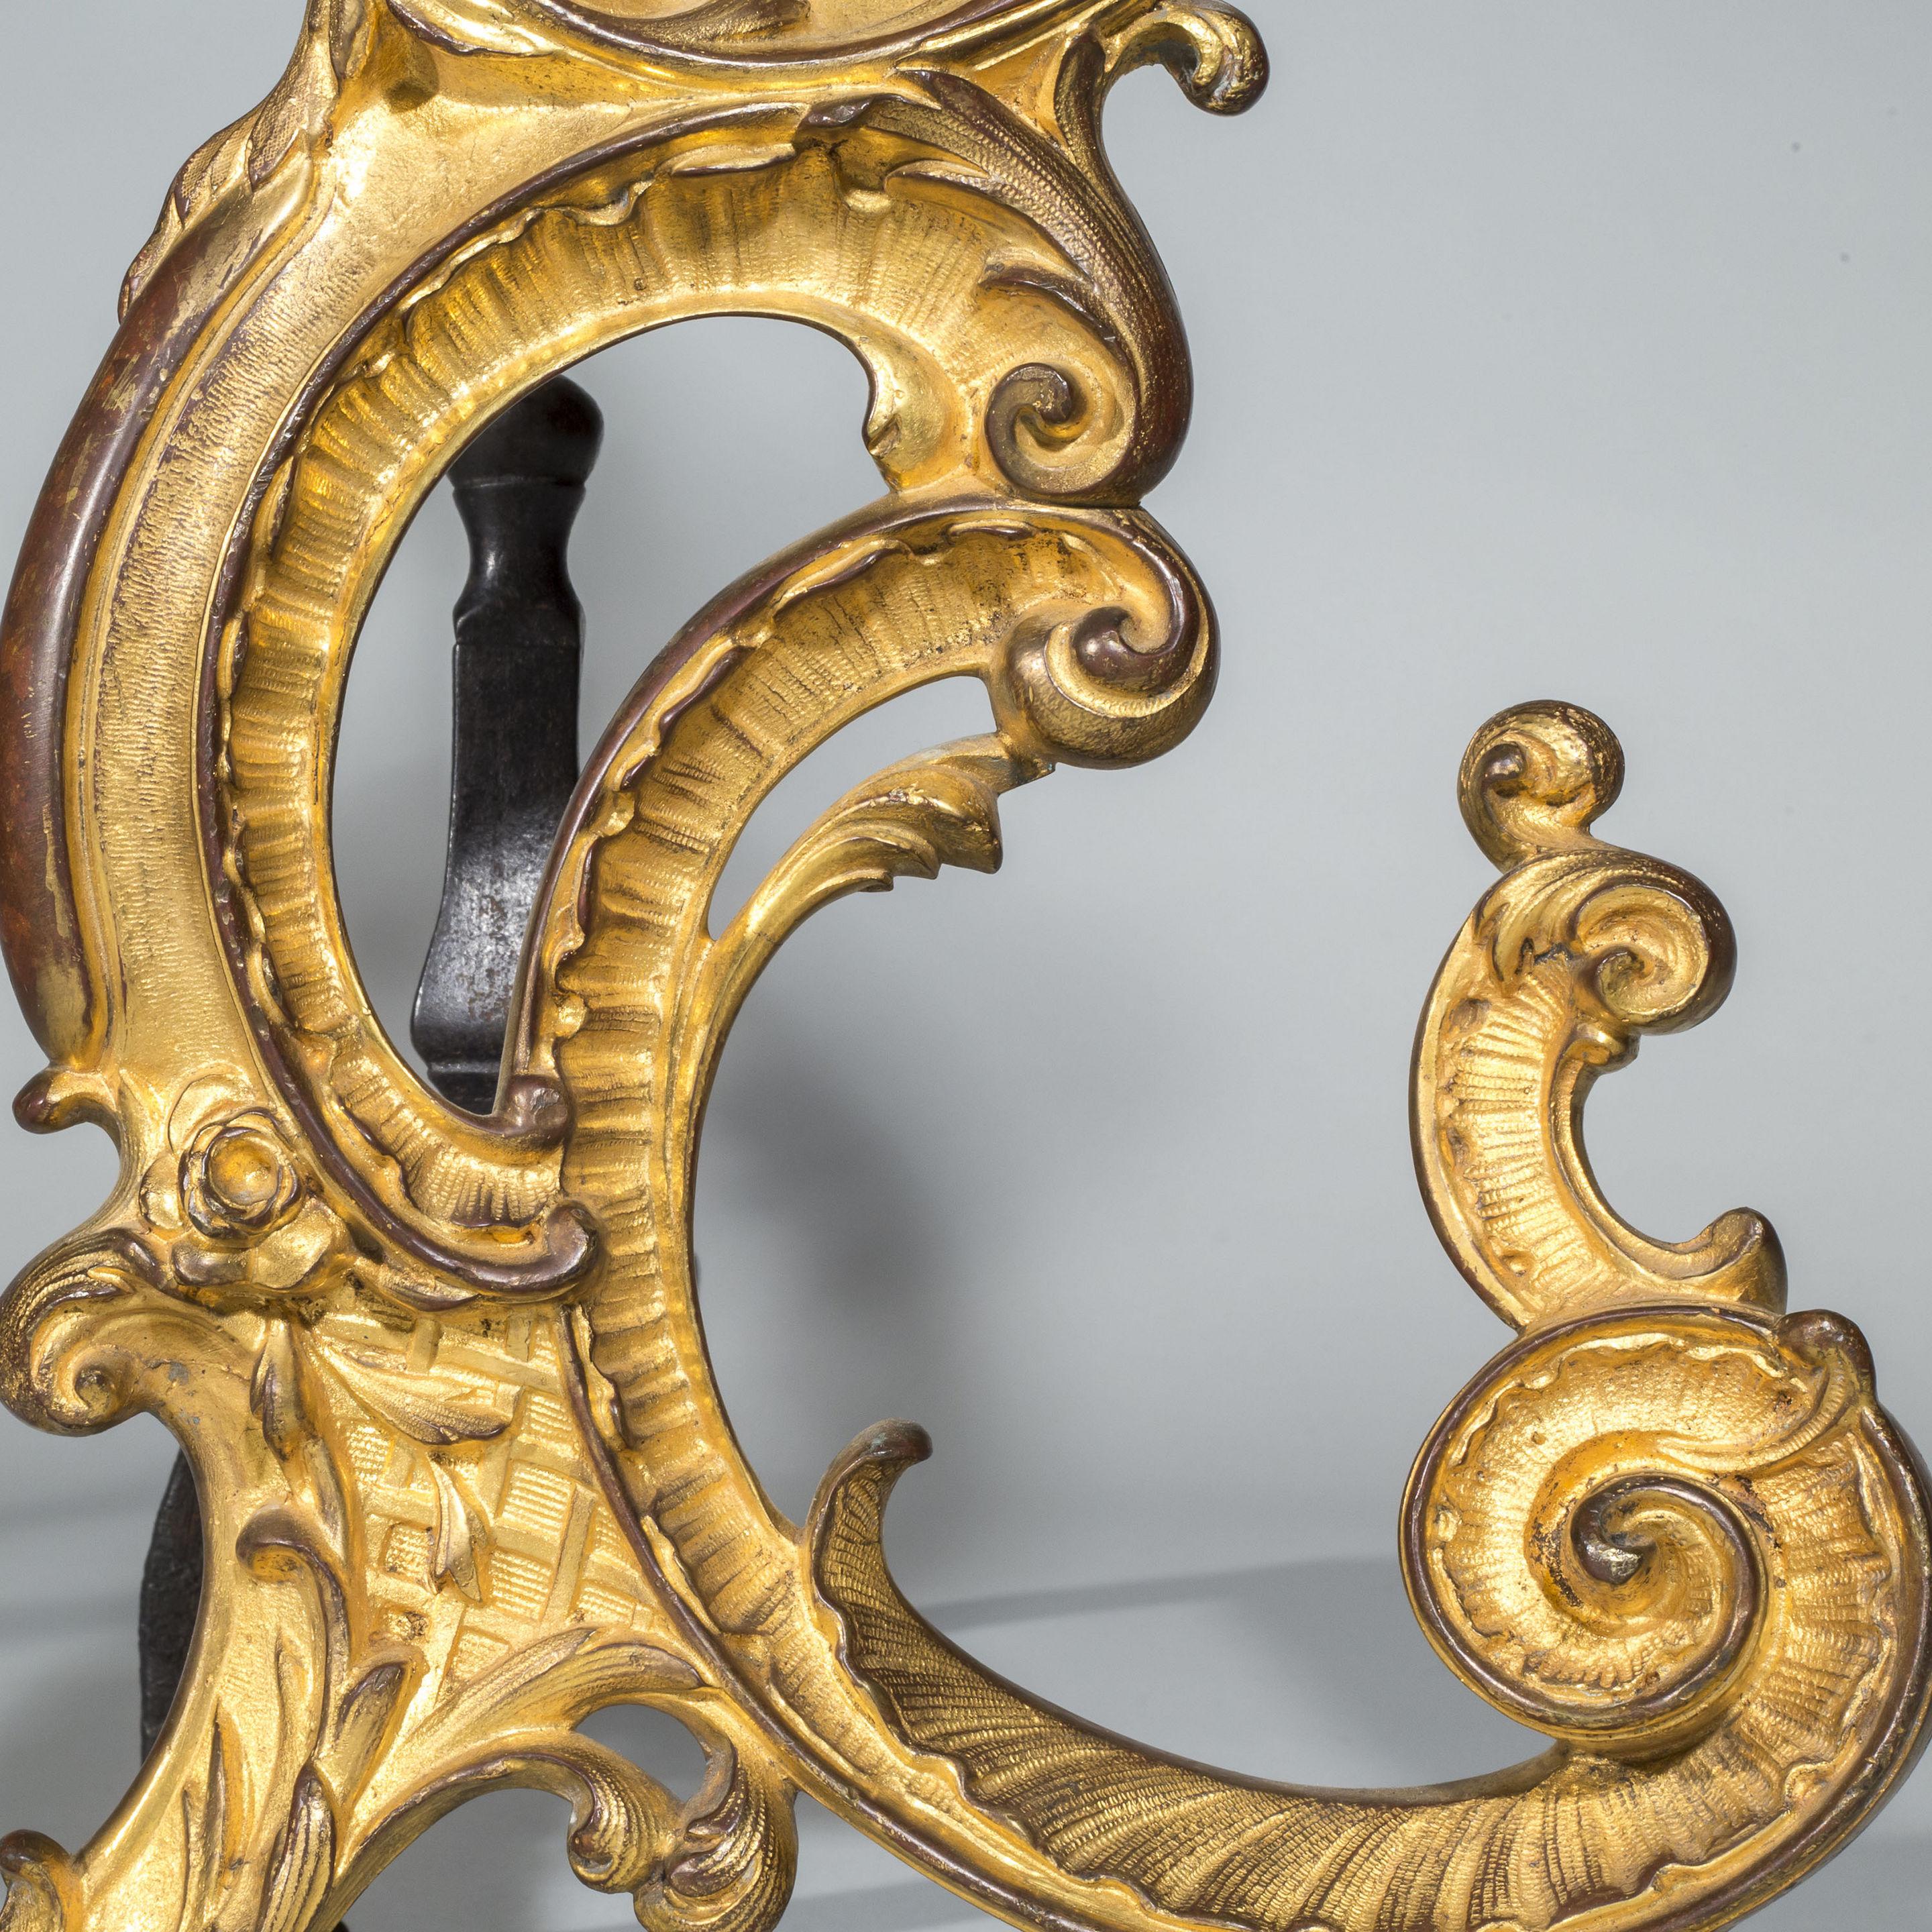 An exceptional pair of 18th century English Rococo gilt bronze andirons or fire dogs.

The bold shape of these andirons relate to designs of Thomas Johnson (1714–1778), one of London's pioneers of the 'Modern' or French style, later known as